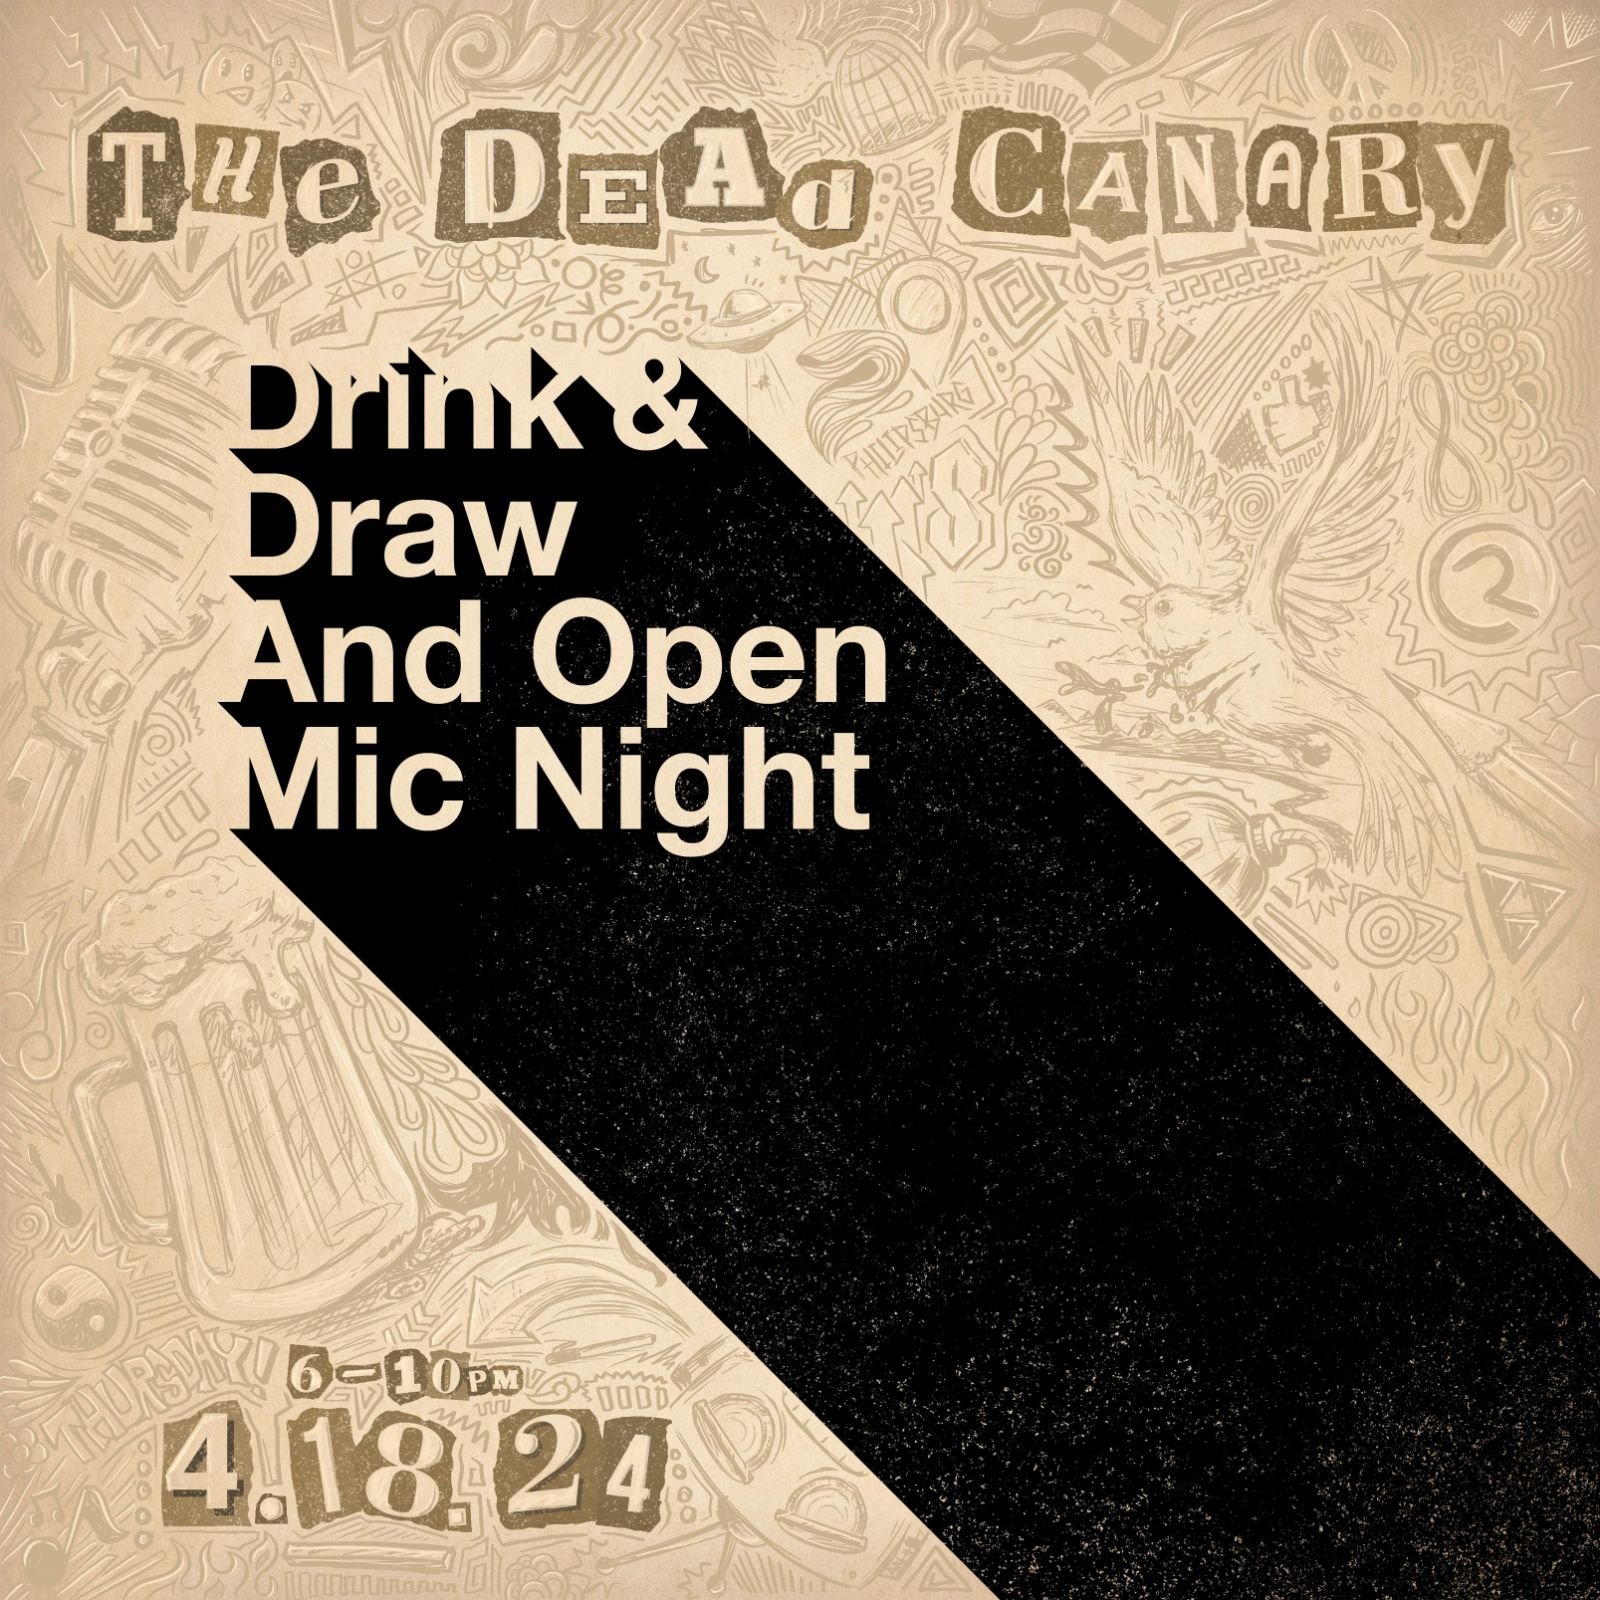 This Thursday! One of our favorite nights every month. Come out and support your local artists, or be one! Drink&amp;Draw is 6pm-10pm, followed by Open Mic from 7pm-9pm! BIG Shoutout to @redtyedesign for this months flyer. We love it! #craftbeer #nan